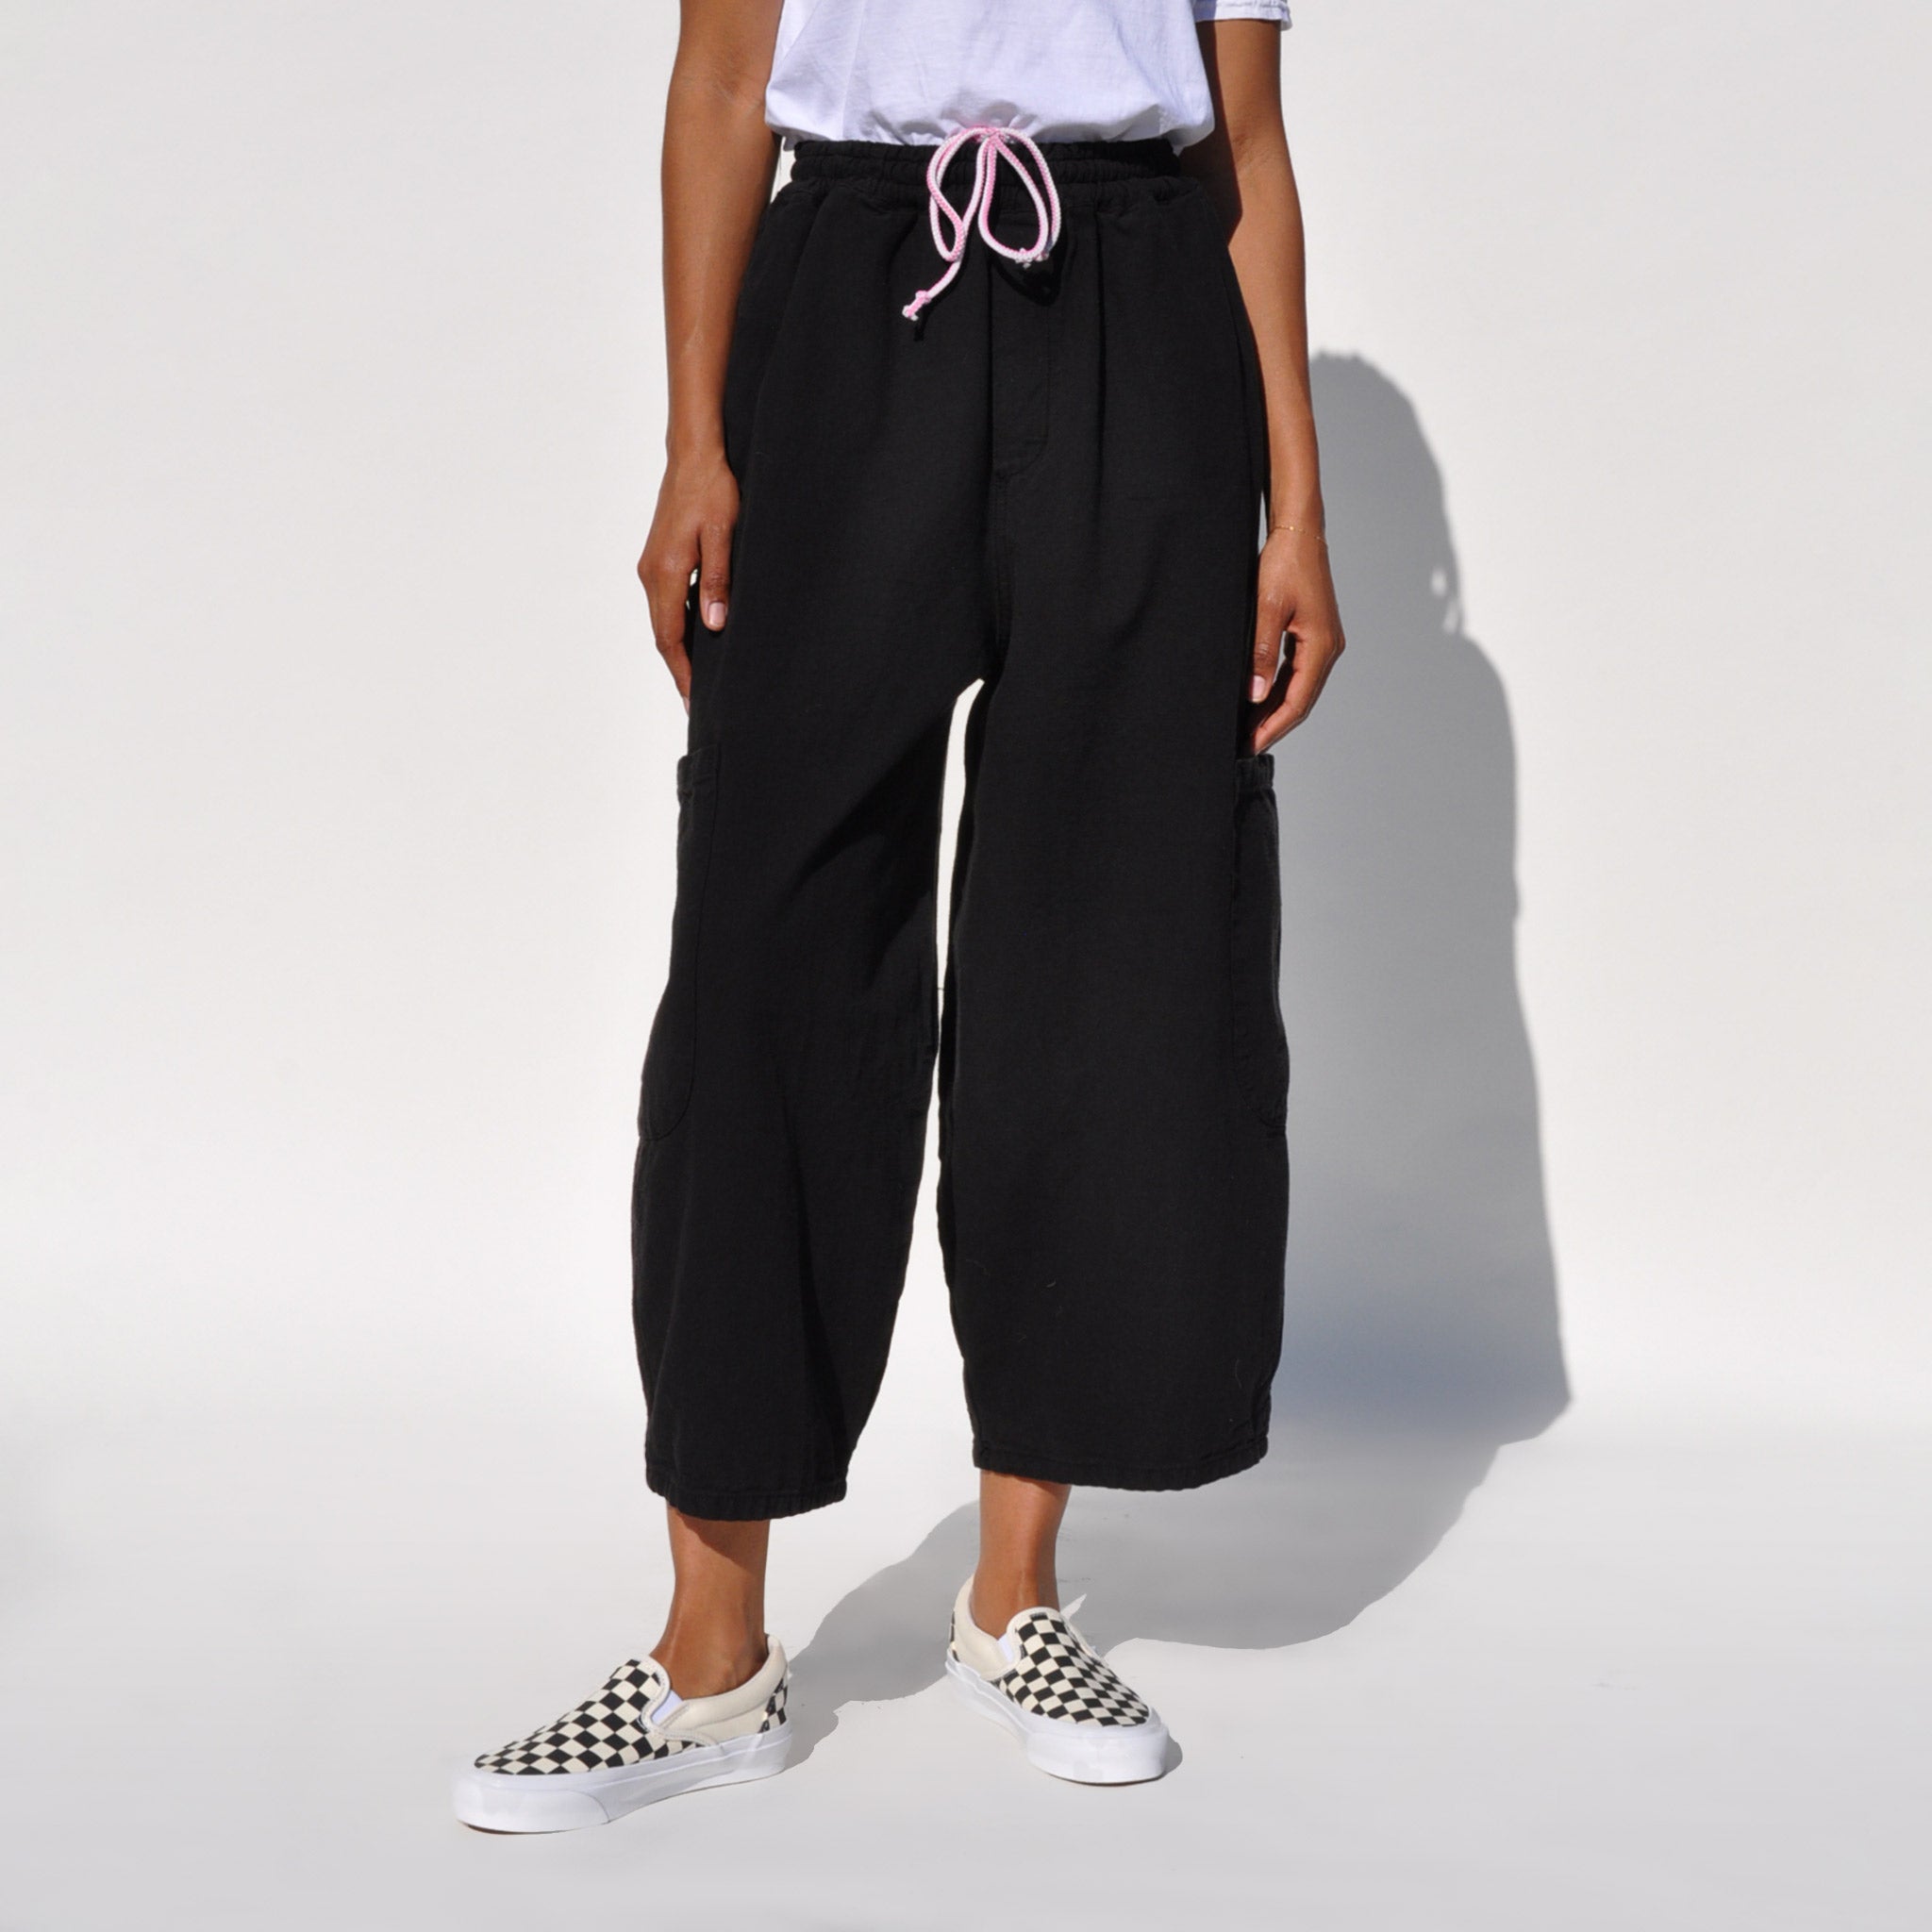 Close photo of a model wearing the chef pants in lack licorice by Meals.